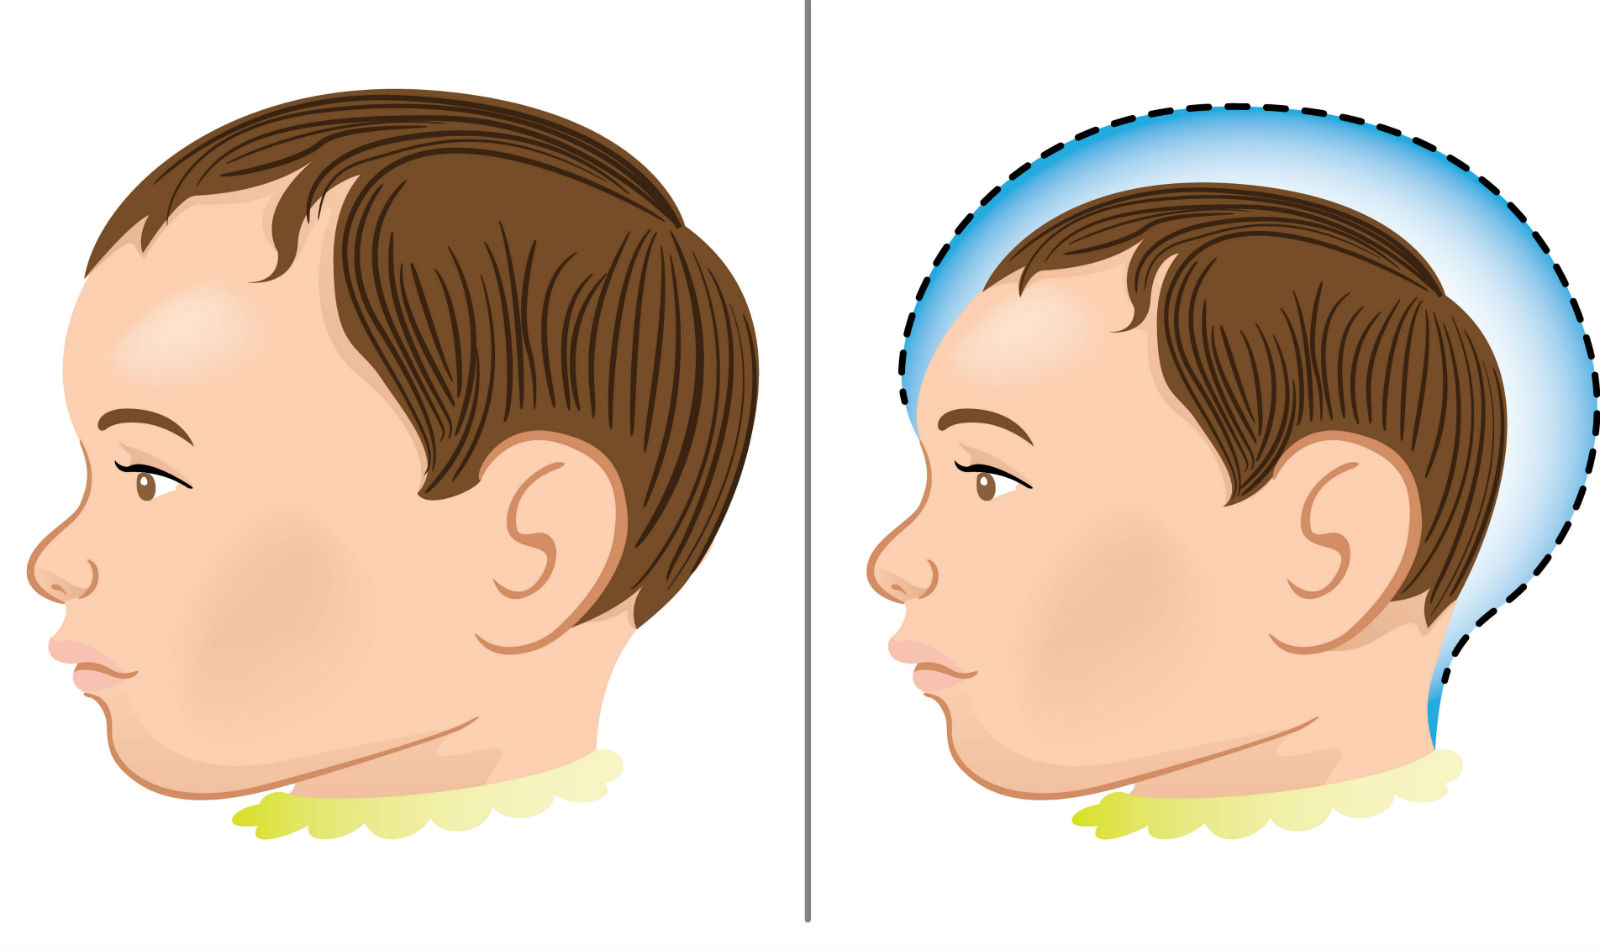 Representation of a healthy child and another one with microcephaly.